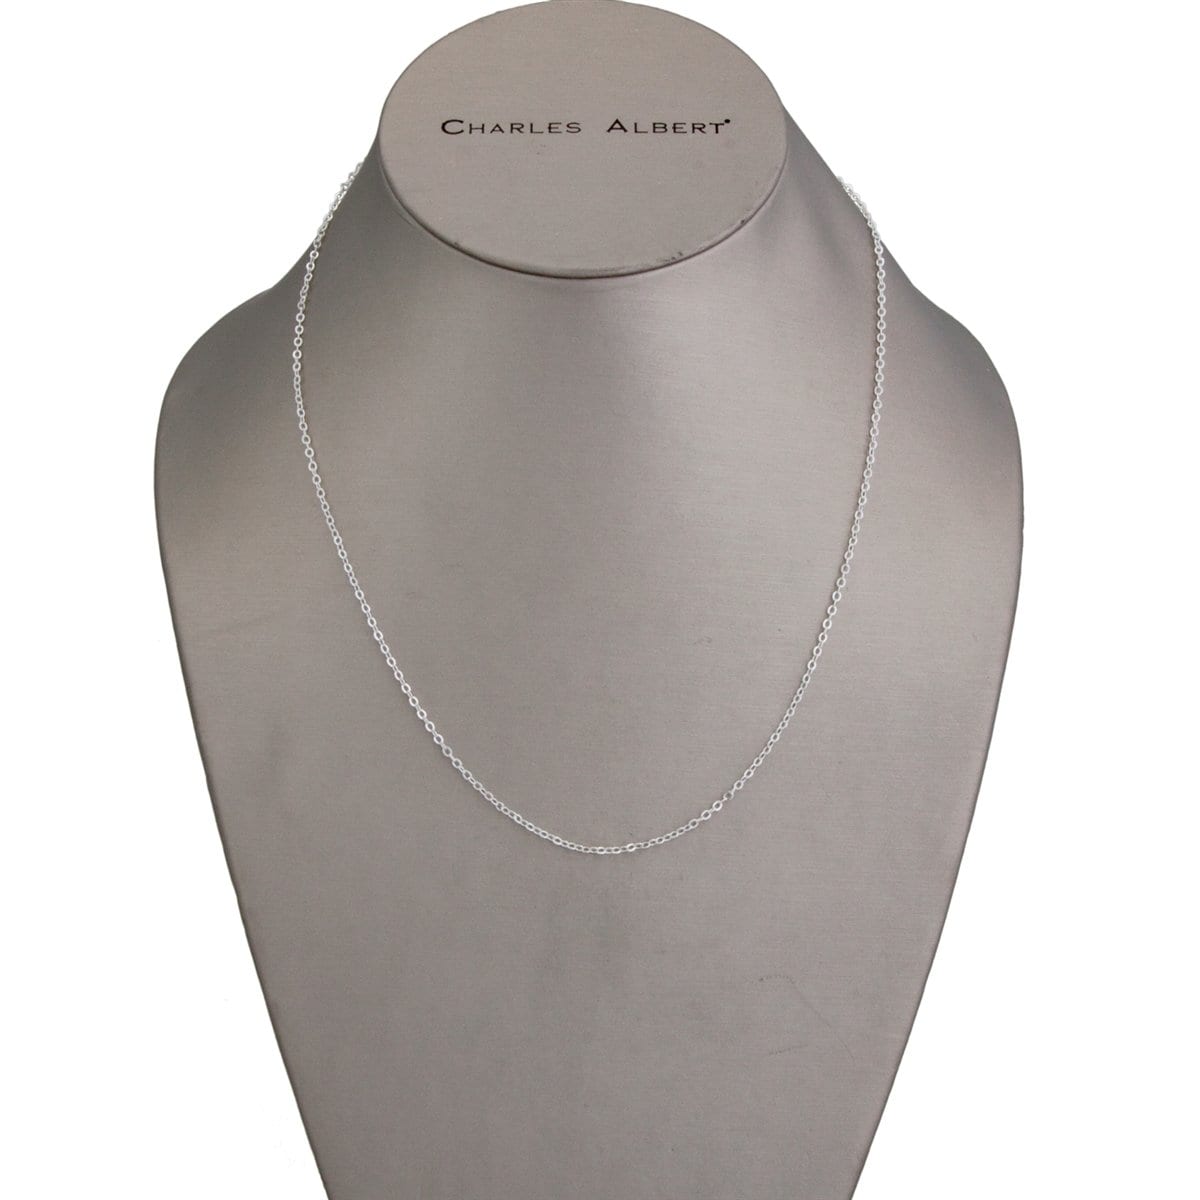 Thin Silver Tone Base Metal Chain - 17&quot; + 3&quot; Extender | Charles Albert Jewelry